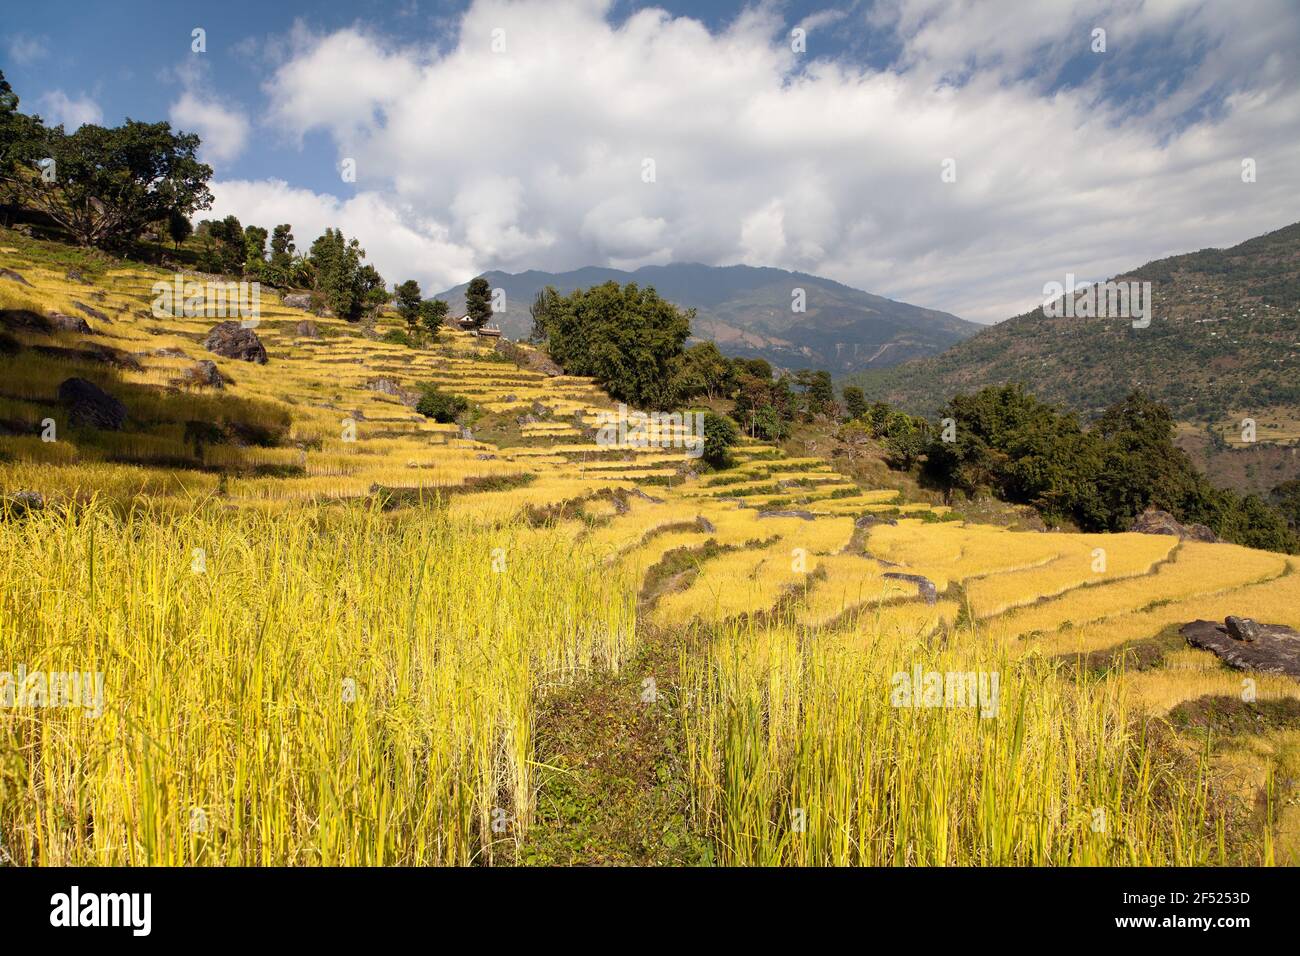 View of golden terraced rice field in Nepal Stock Photo